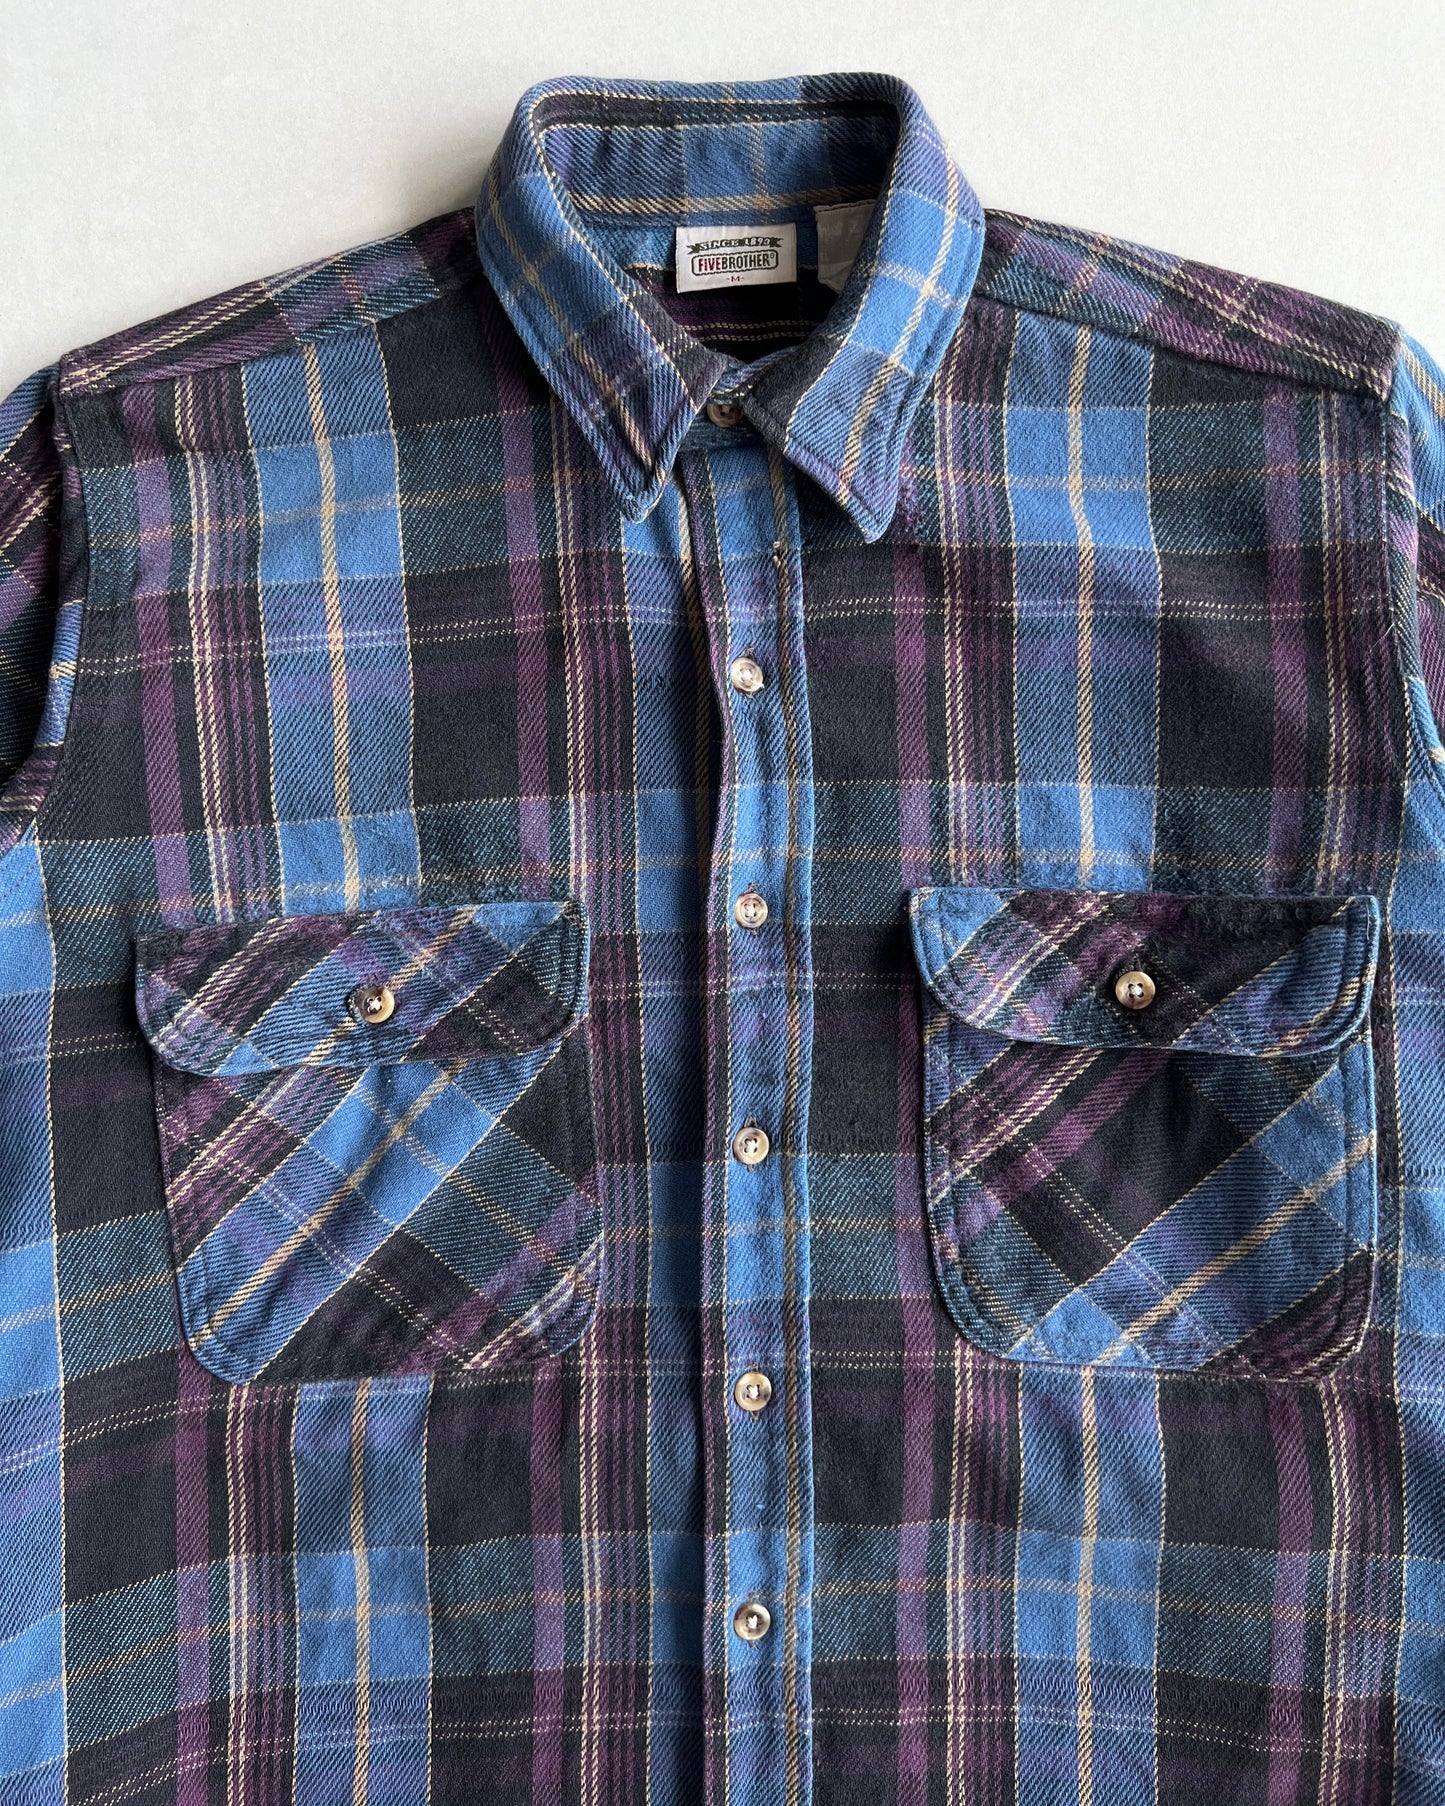 1990S FIVE BROTHER DOUBLE POCKET FLANNEL (M)